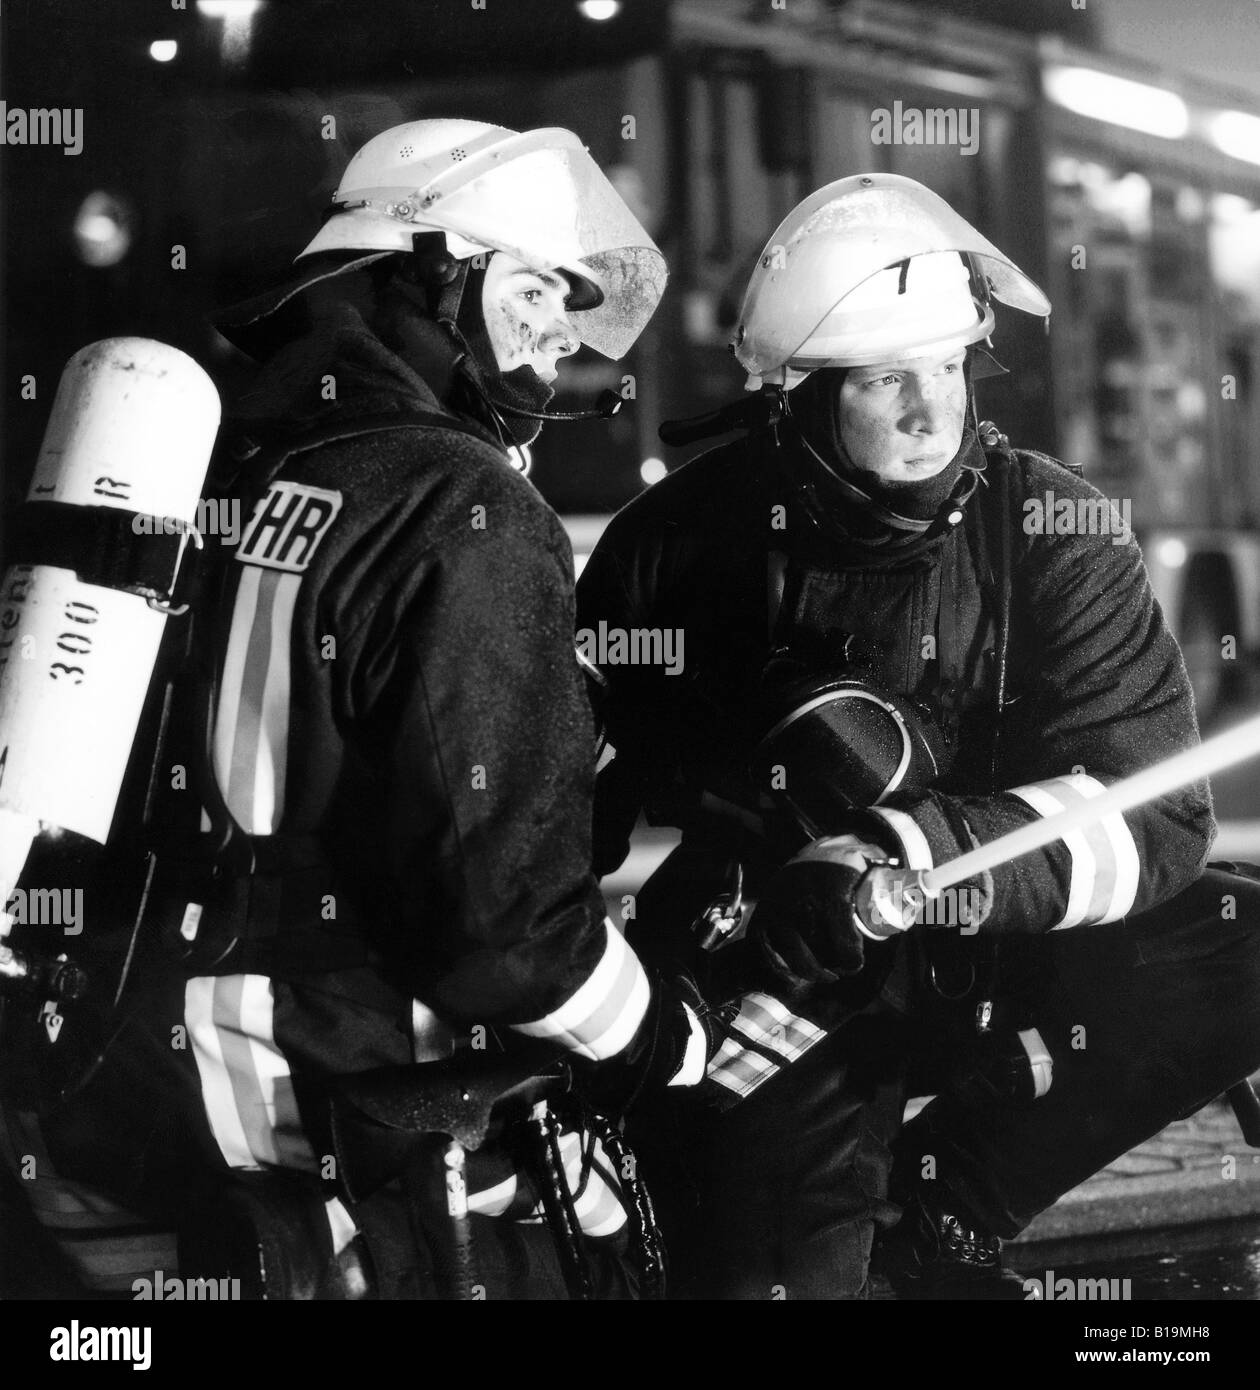 young firefighters with breathing protection and extinguisher in action, at night, black and white, Germany Stock Photo